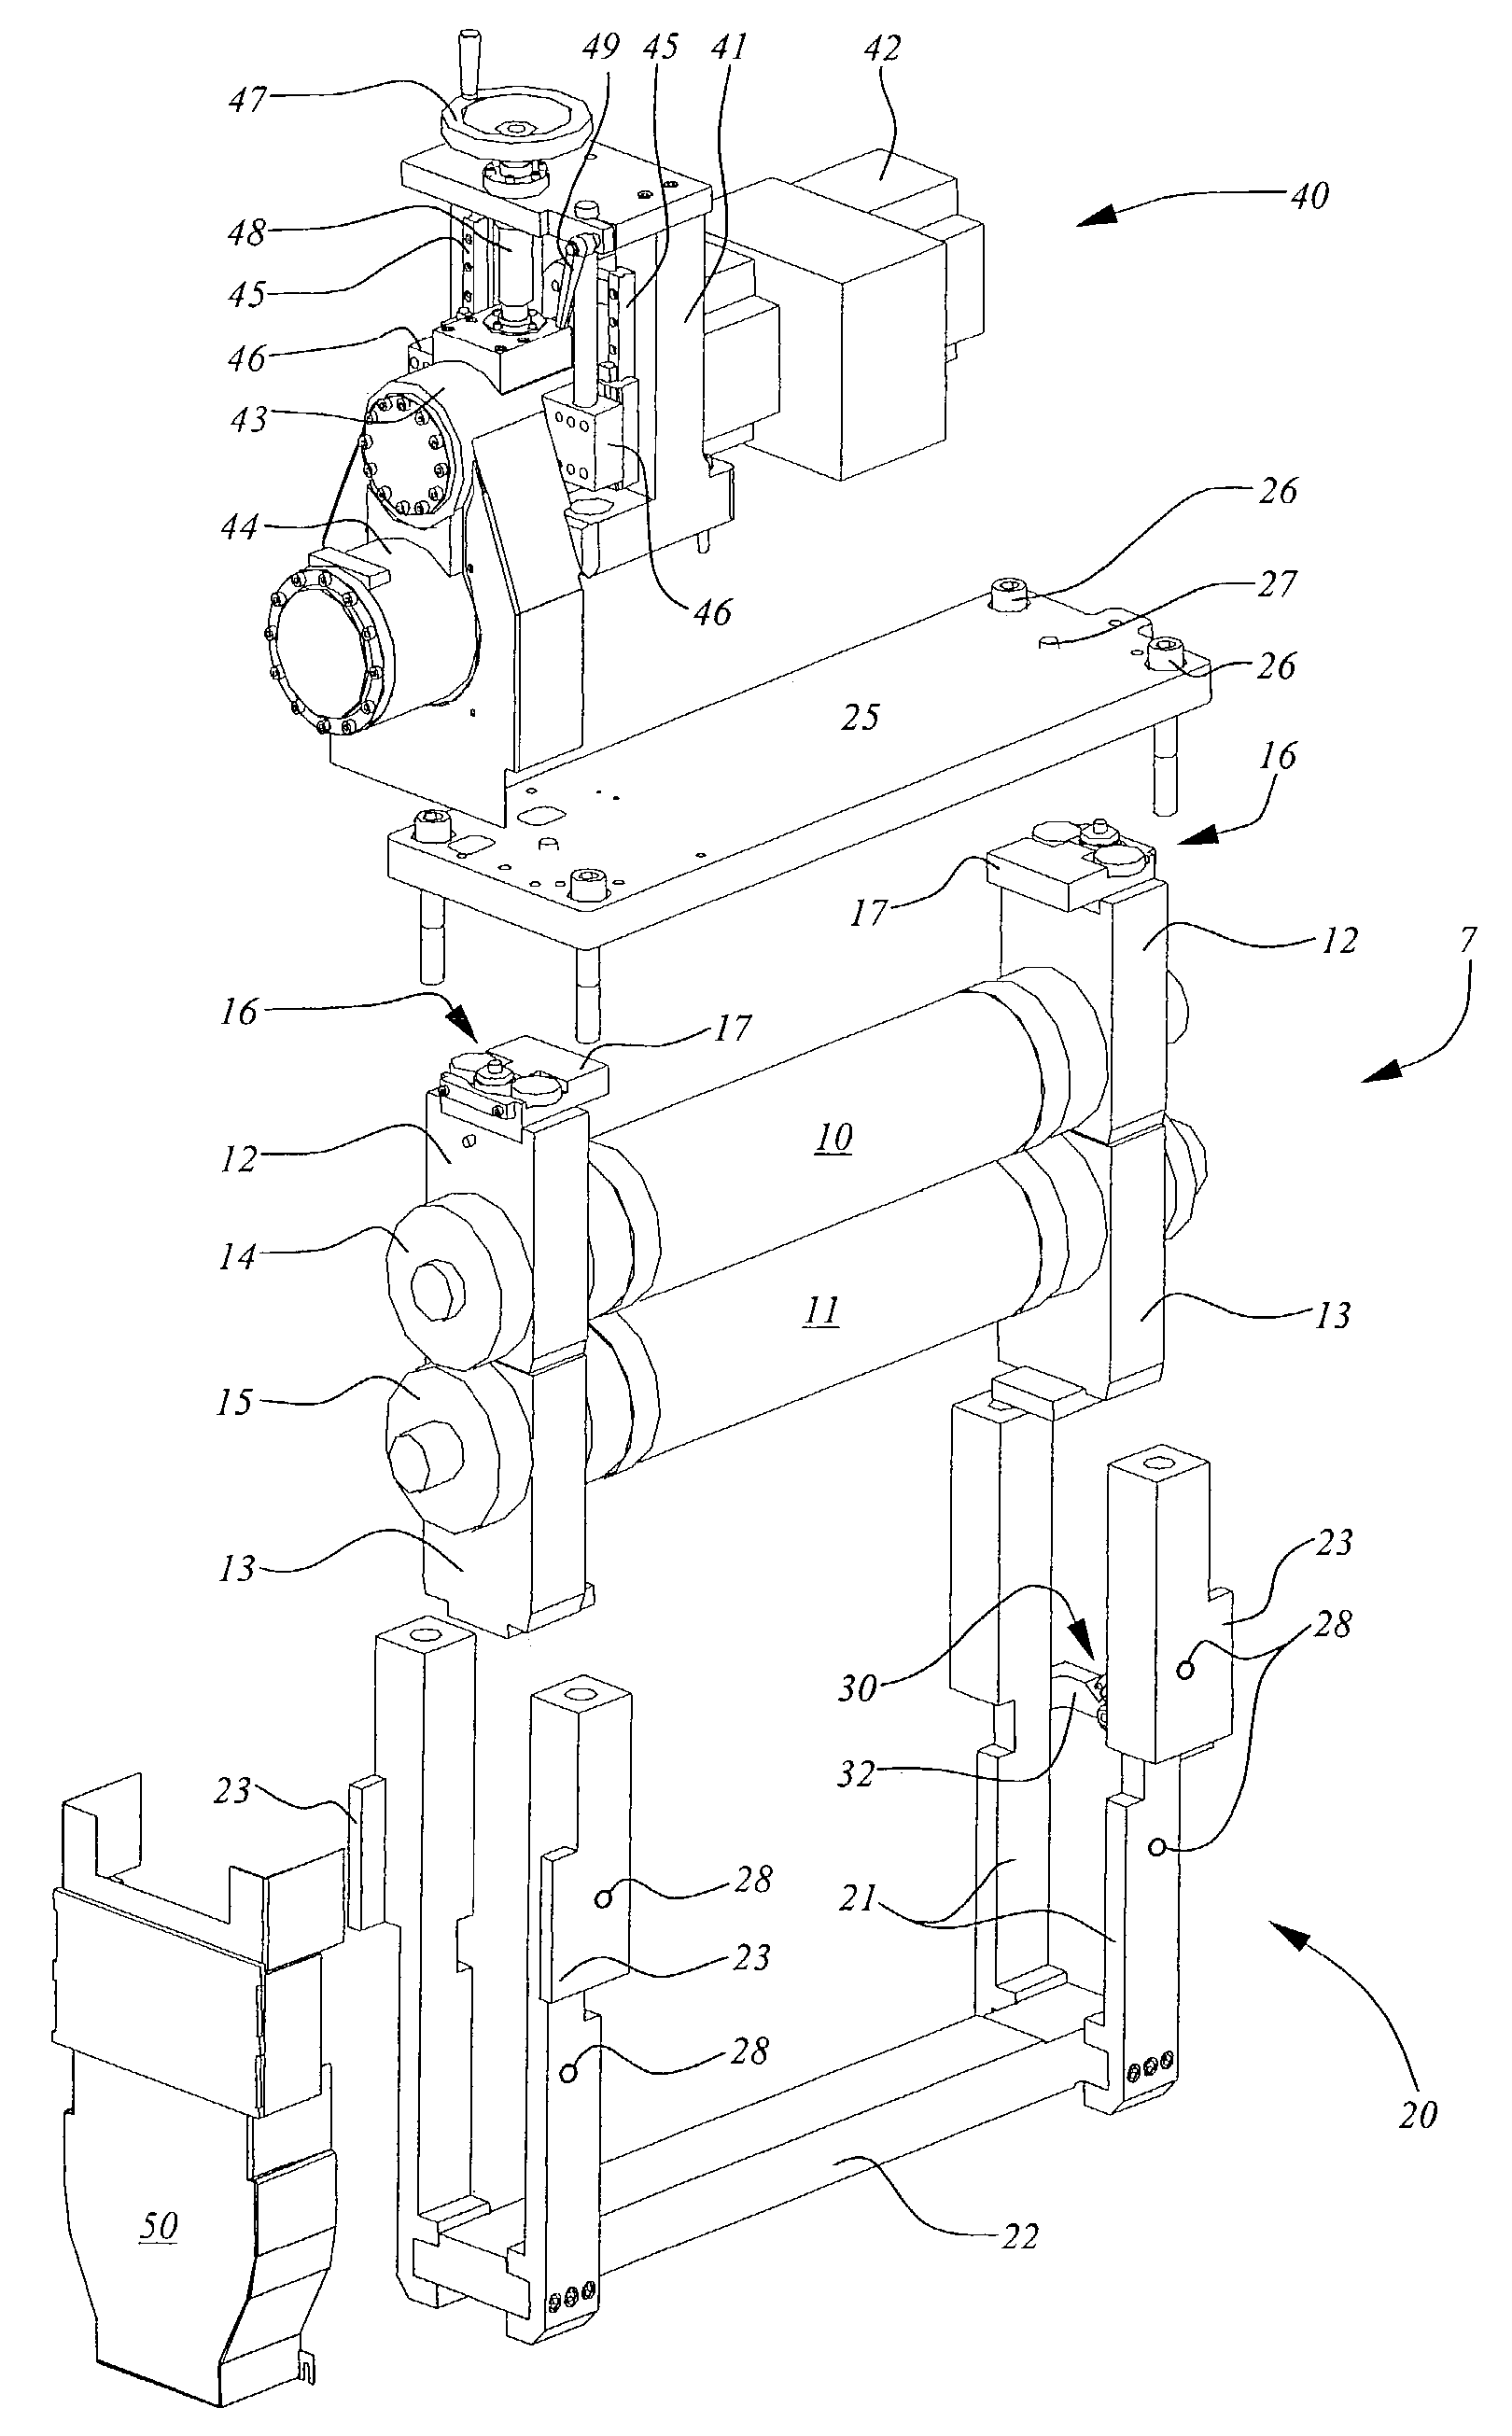 Device for rotary converting a web or sheet matter